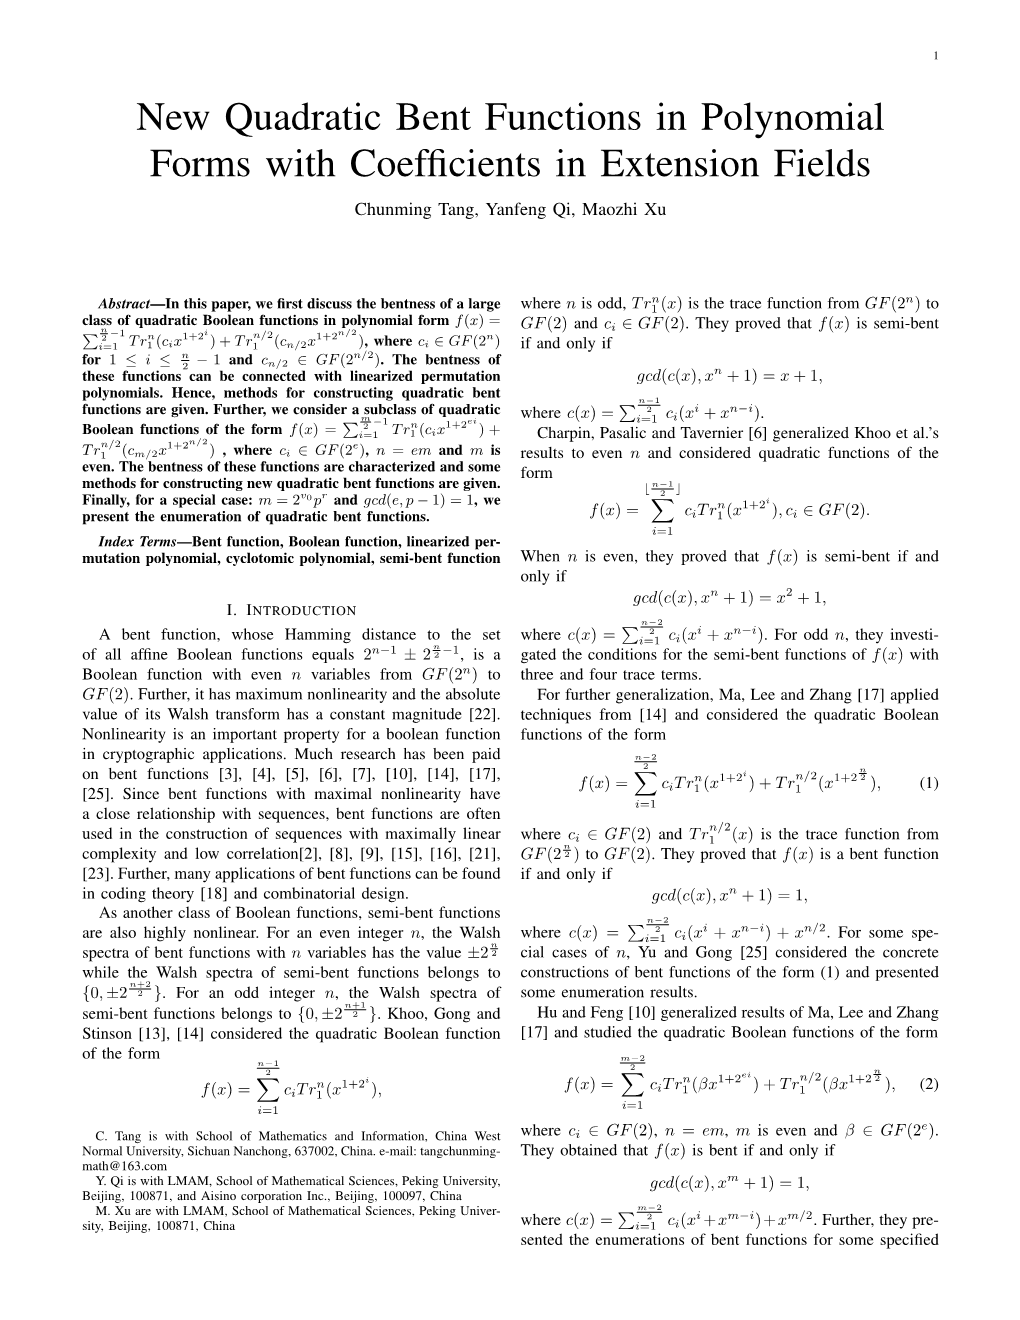 New Quadratic Bent Functions in Polynomial Forms with Coefficients